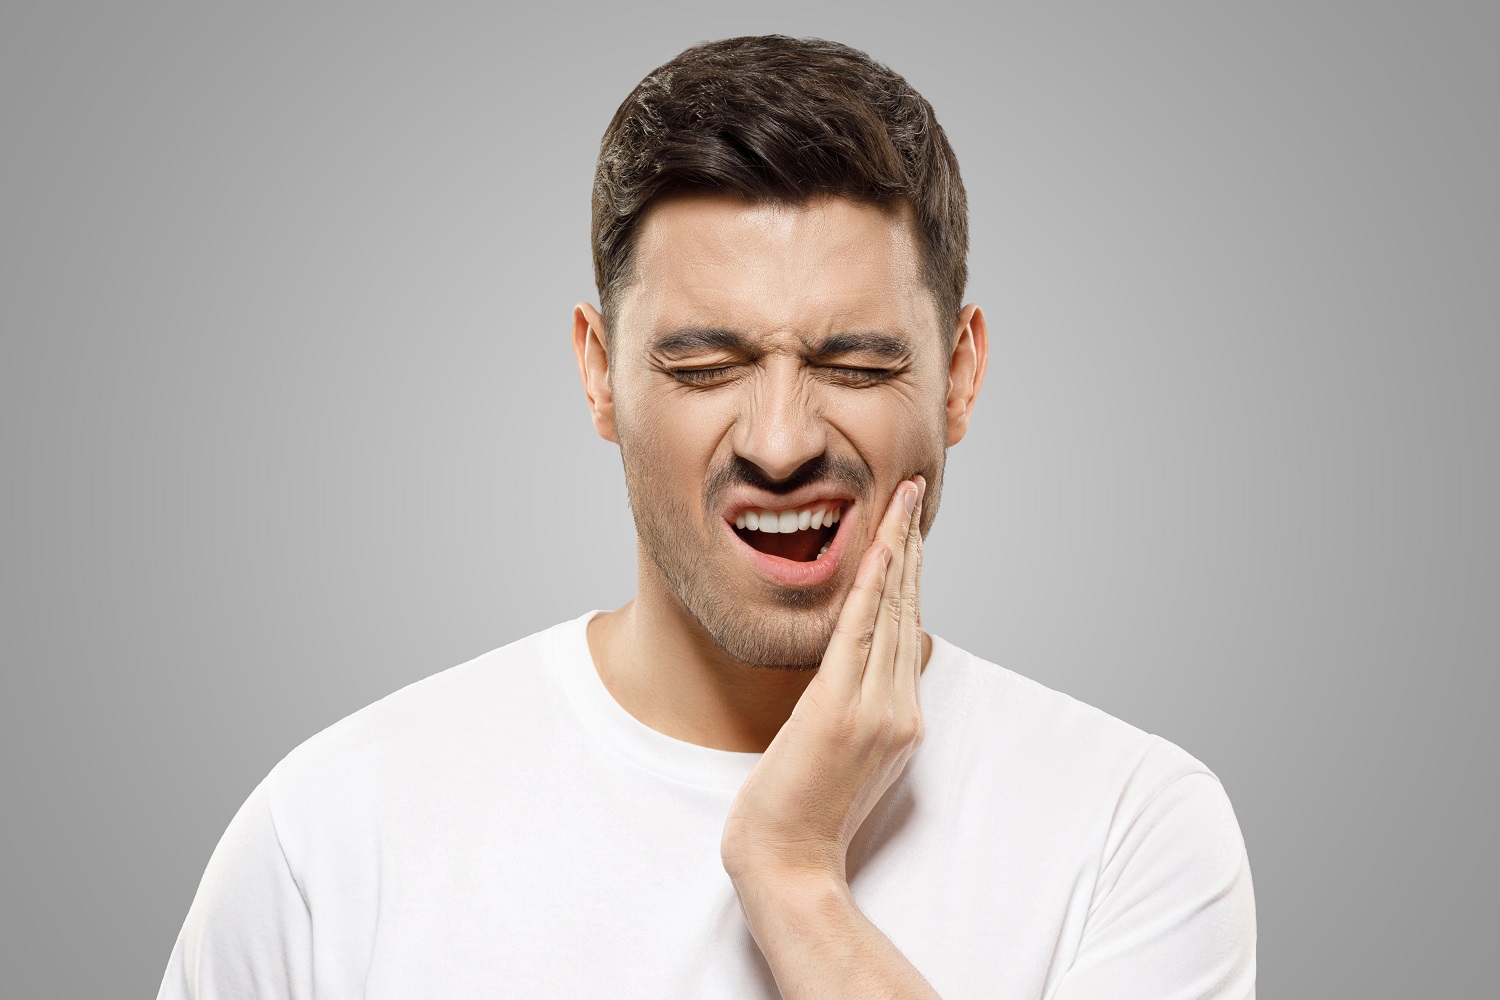 What to Know About TMJ Disorders